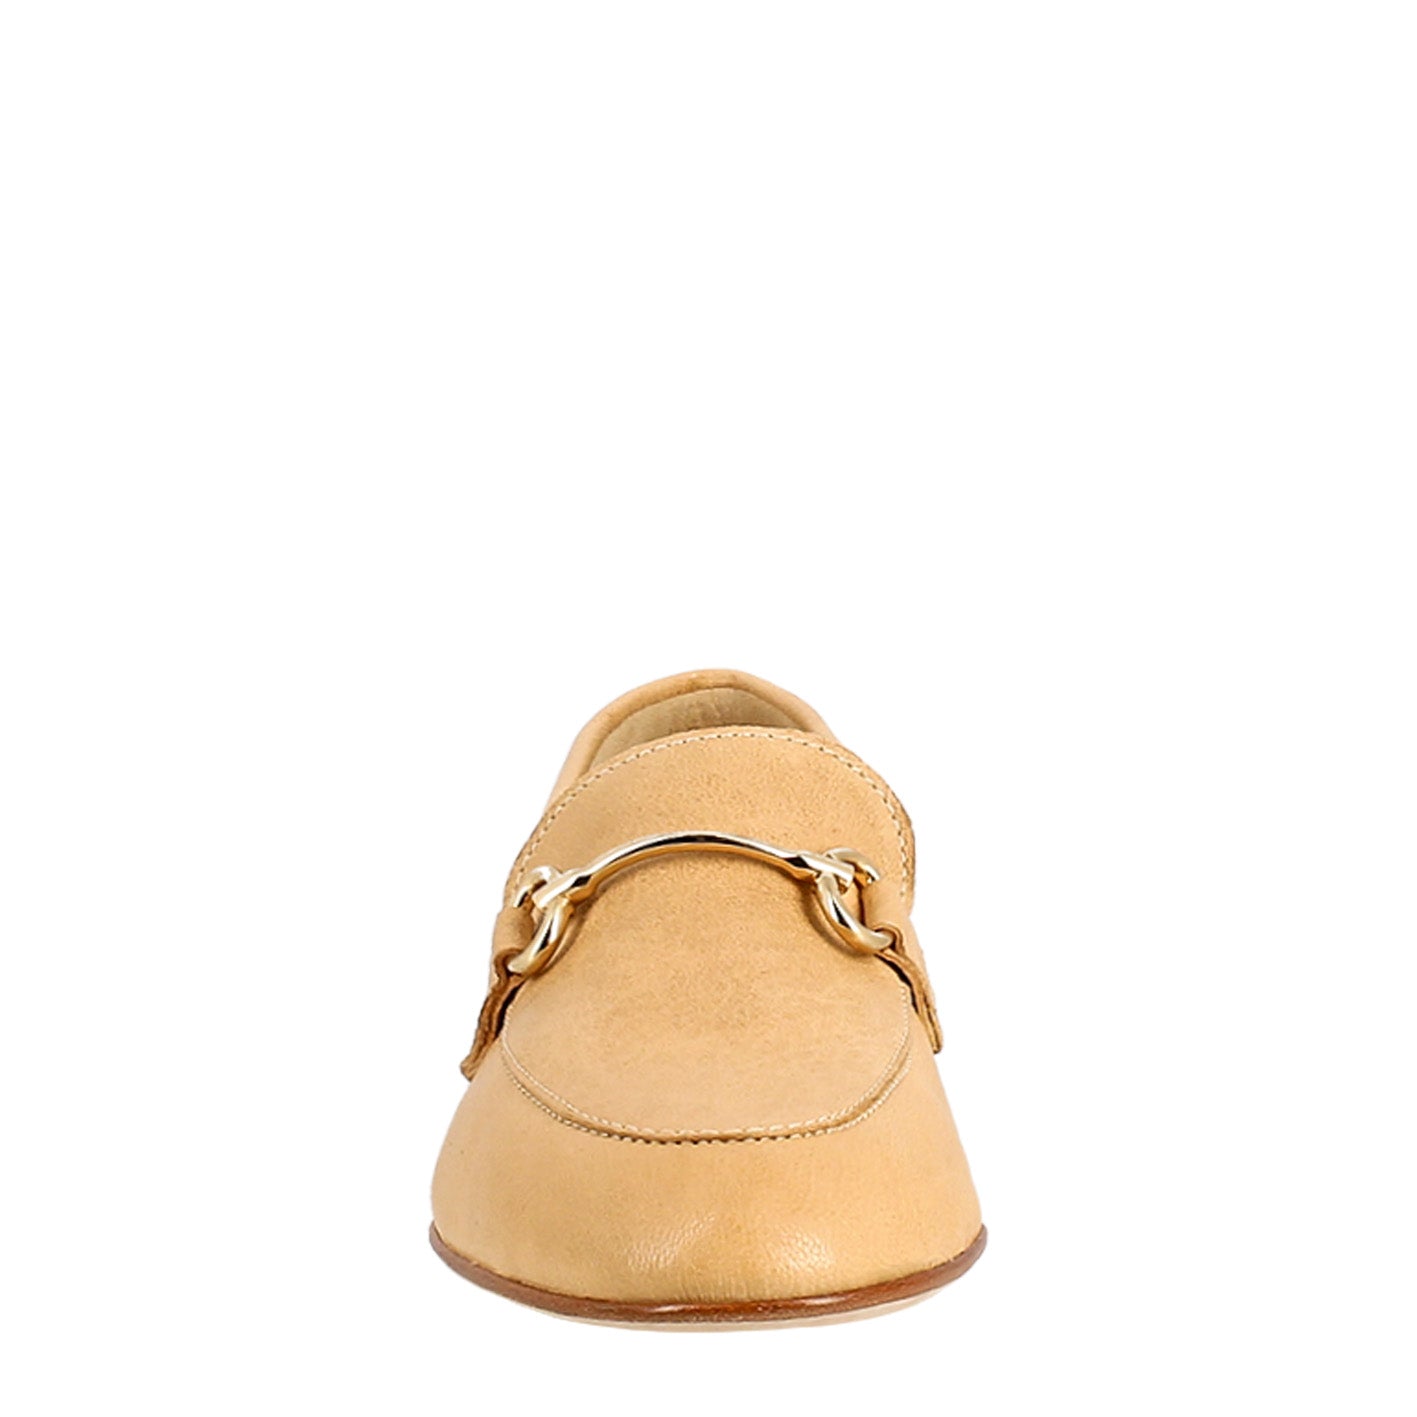 Women's moccasin in beige leather with gold horsebit